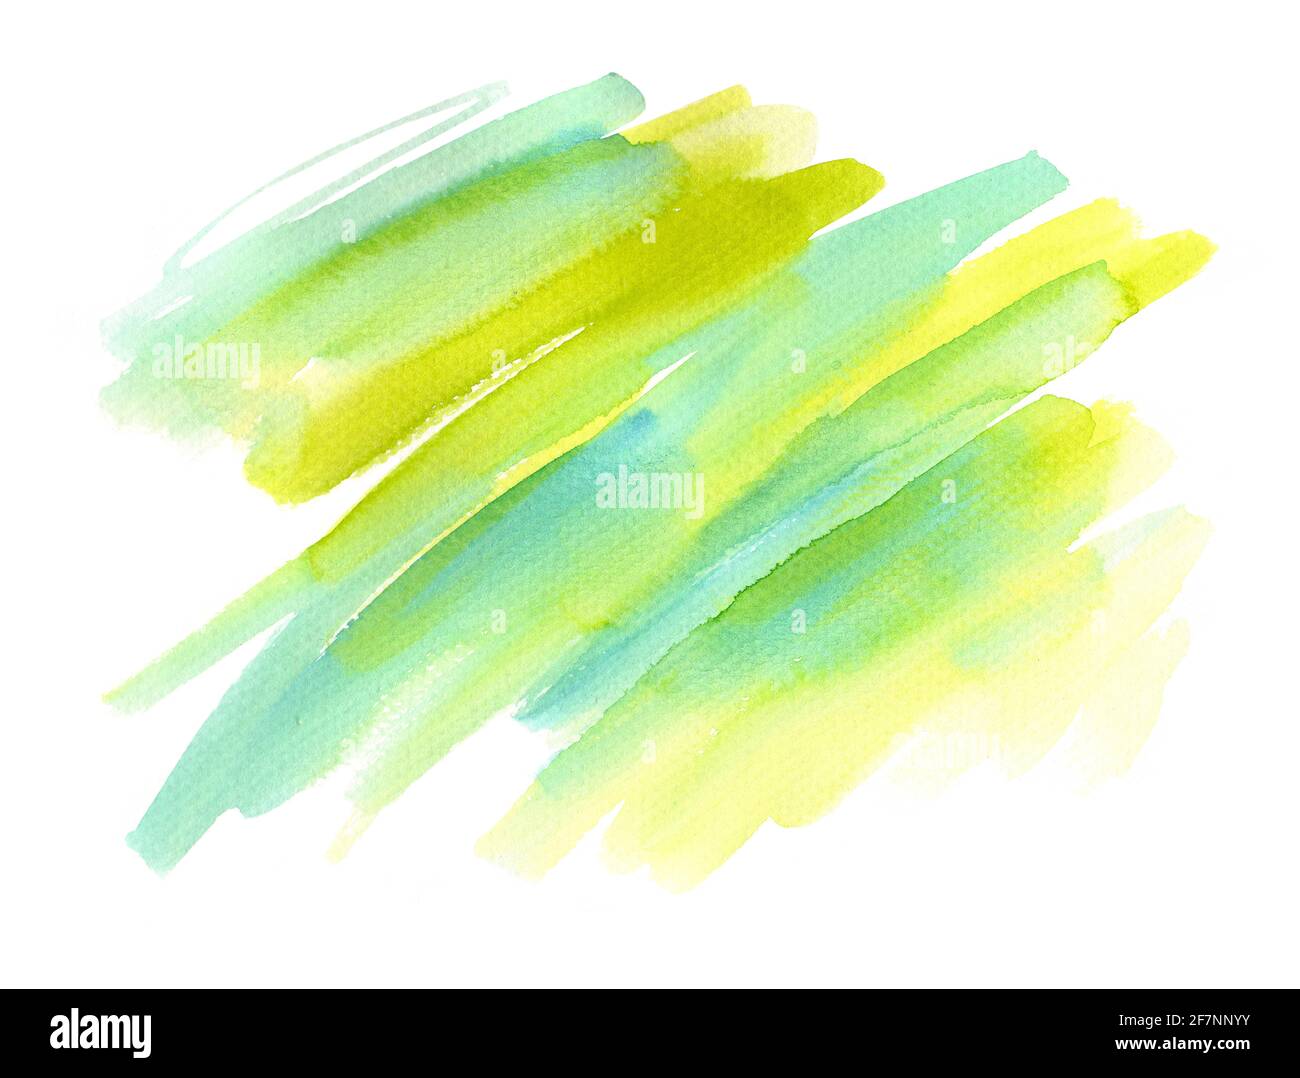 green-blue abstract background. Watercolor hand painting on white background. Grunge design element for poster, flyer, name card. Stock Photo